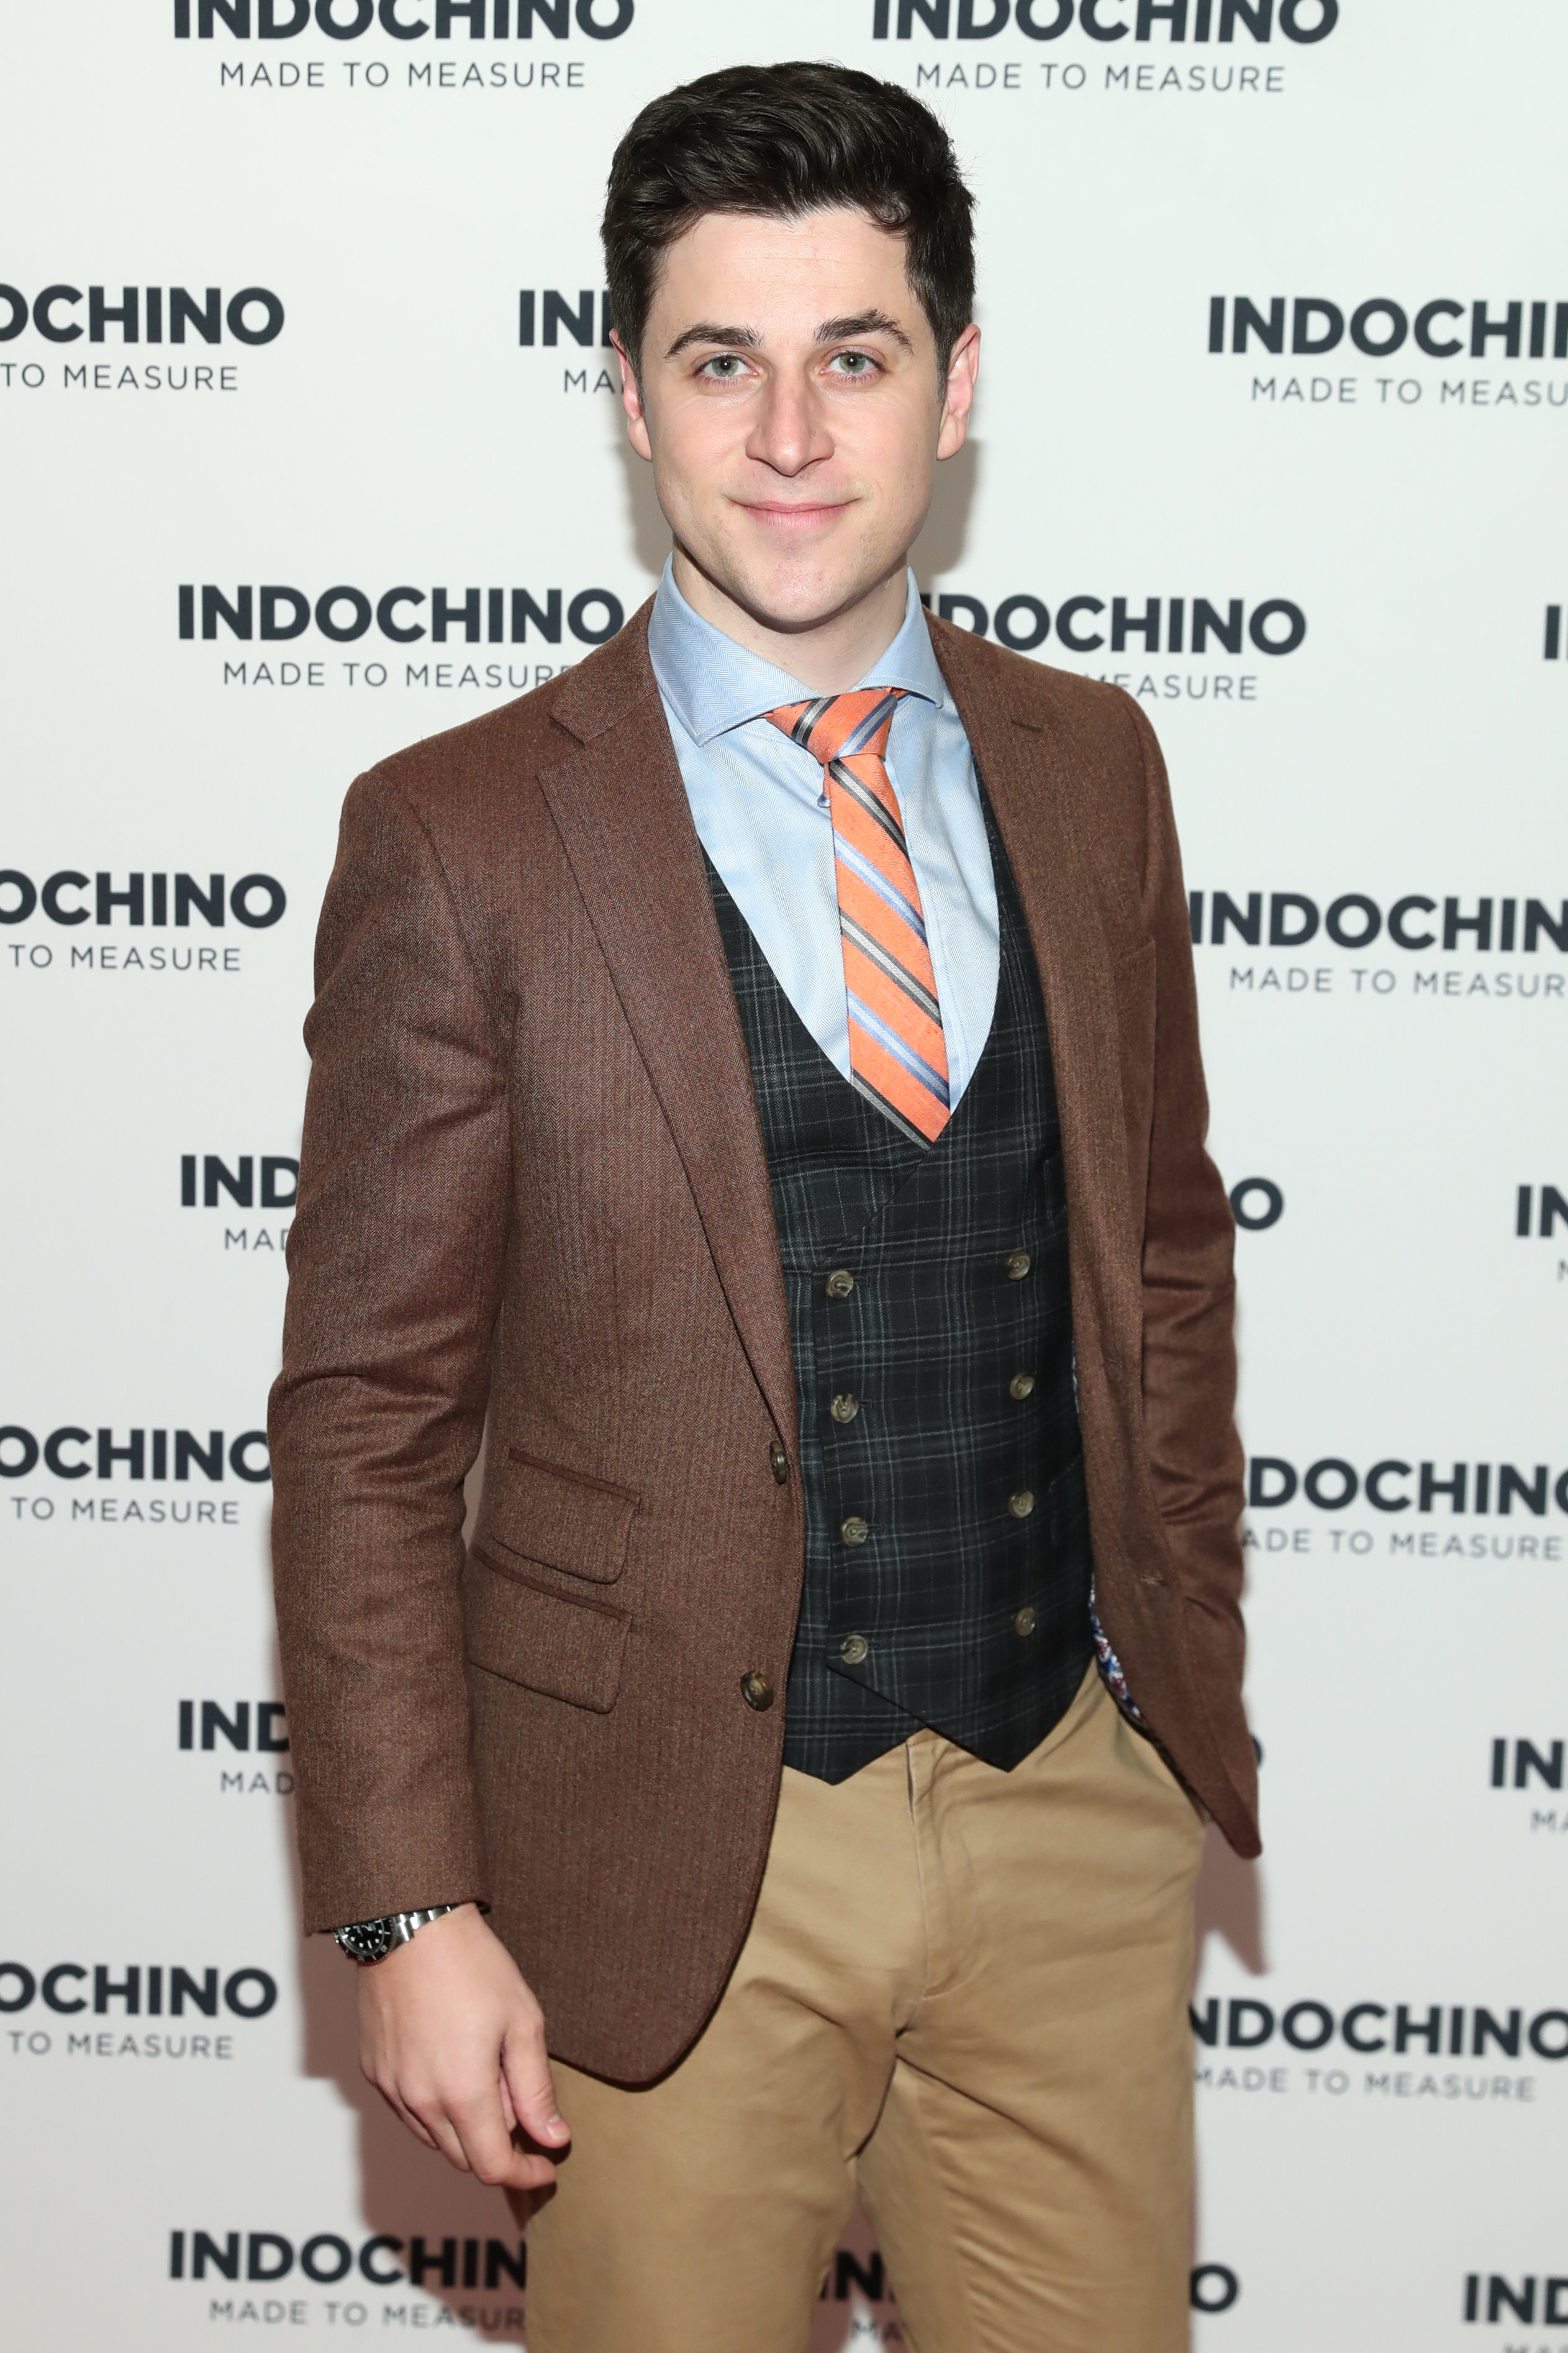 Actor David Henrie at the Indochino Red Carpet launch party in 2019